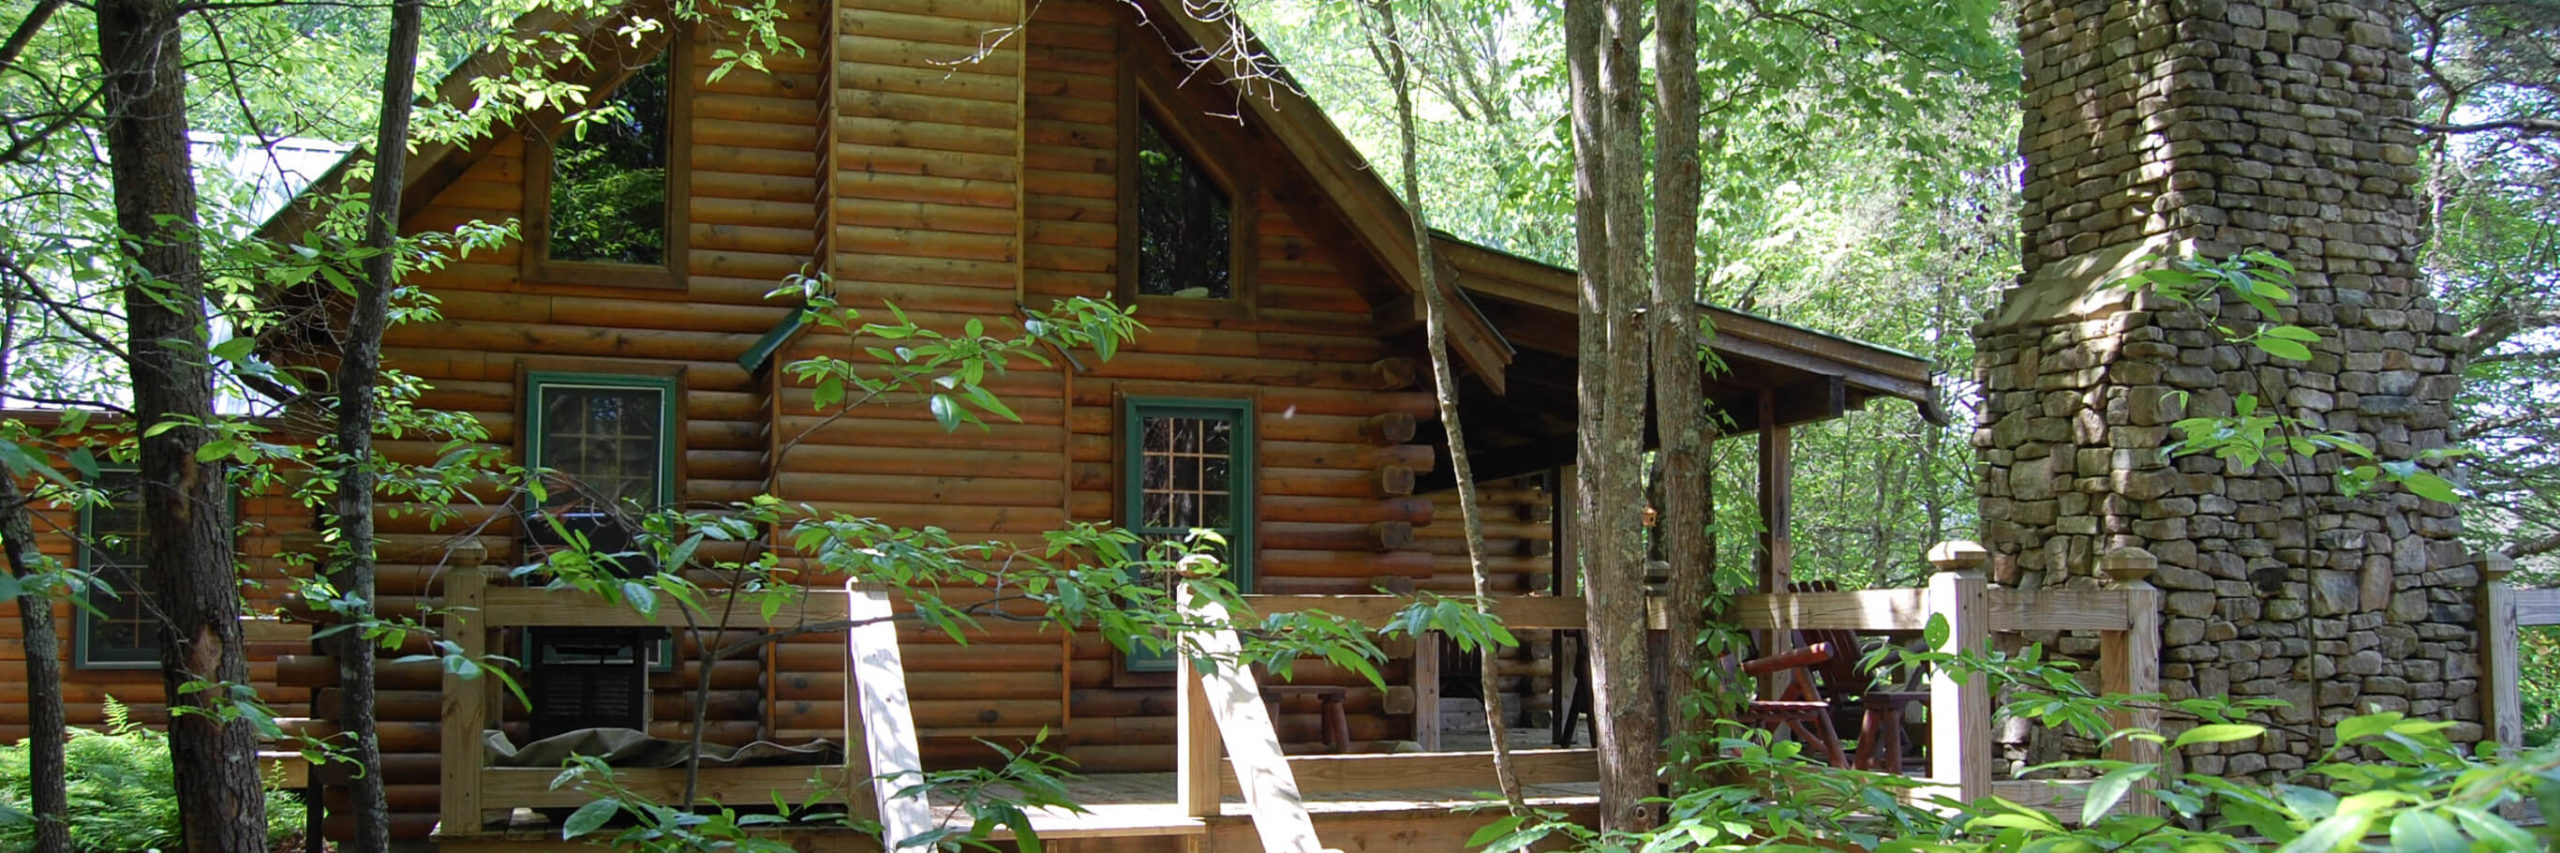 Mountain lodging Tennessee